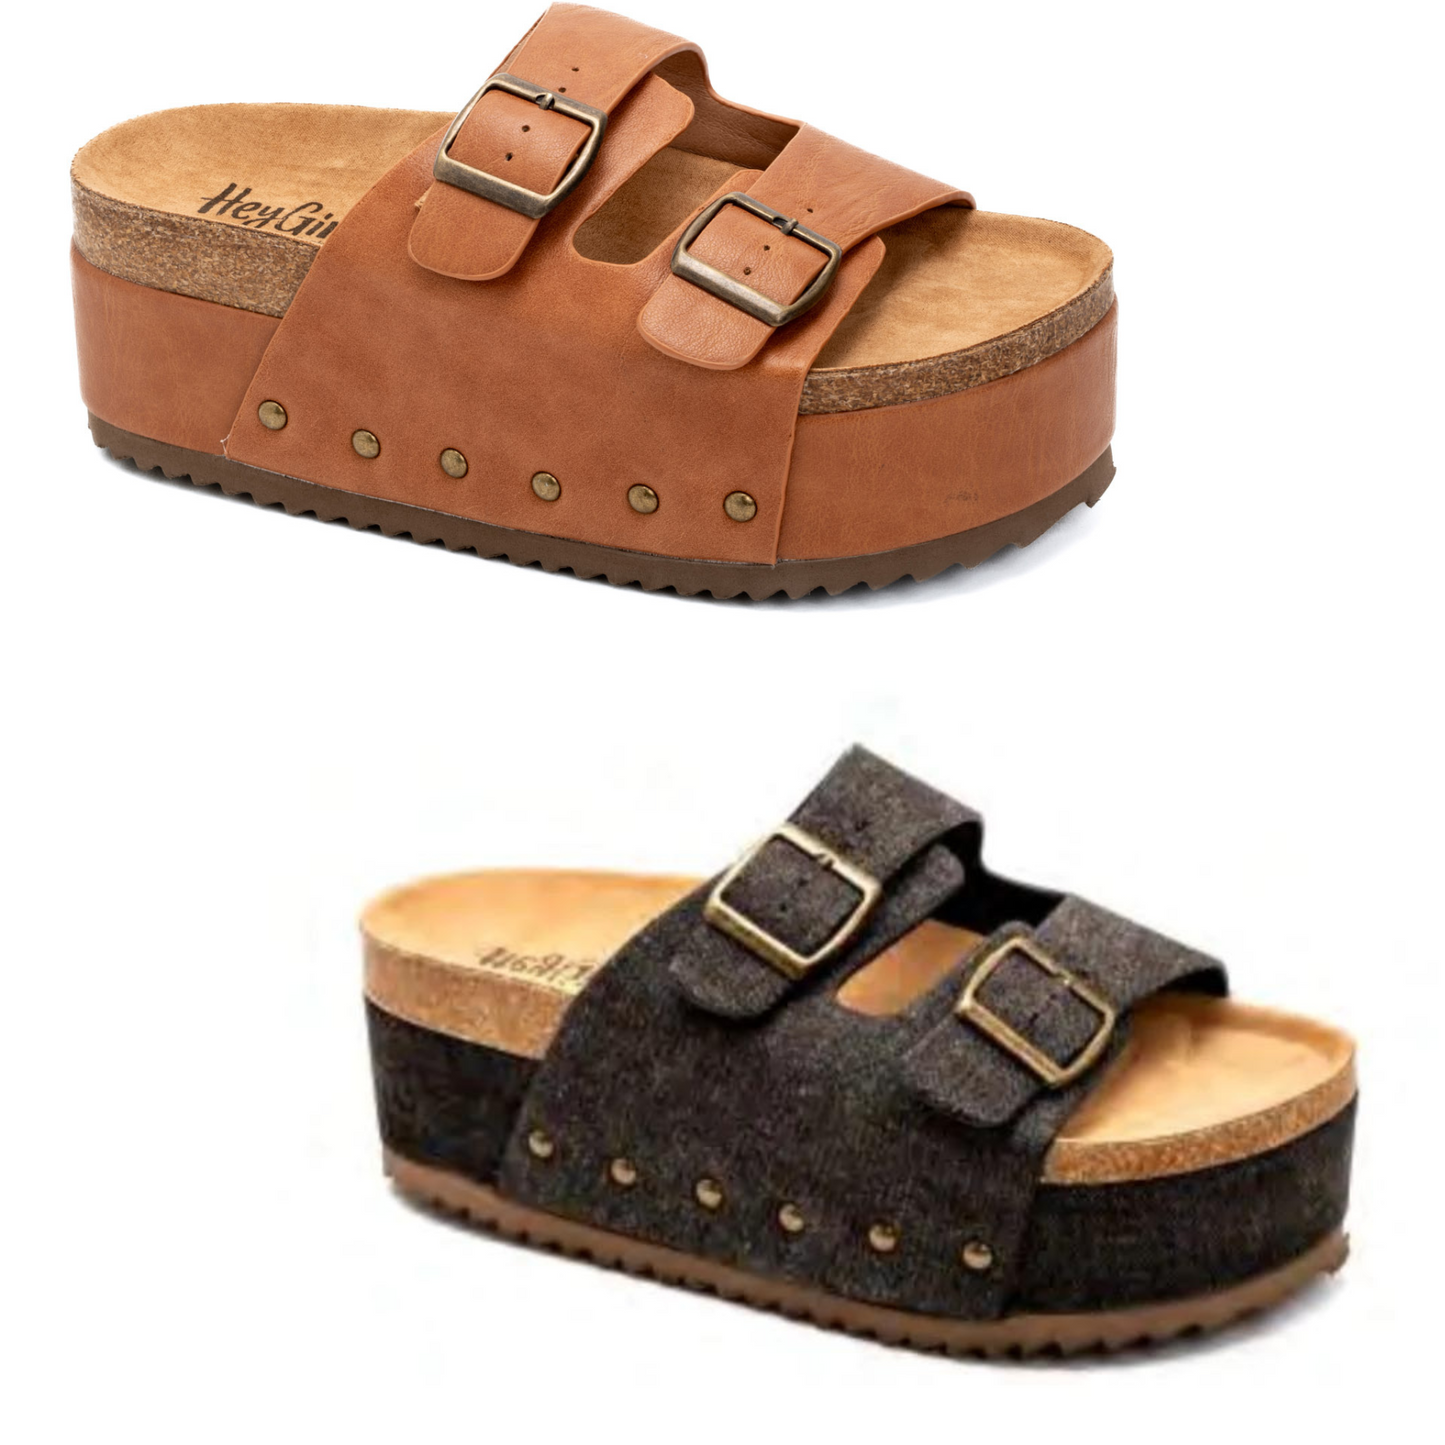 The Wannabe by Corky's is a stylish and comfortable platform sandal in a beautiful tan color. The durable and lightweight, extra cushioning layer provides enhanced comfort so you can look and feel your best all day long. Perfect for any occasion, the Wannabe is sure to complete your outfit.